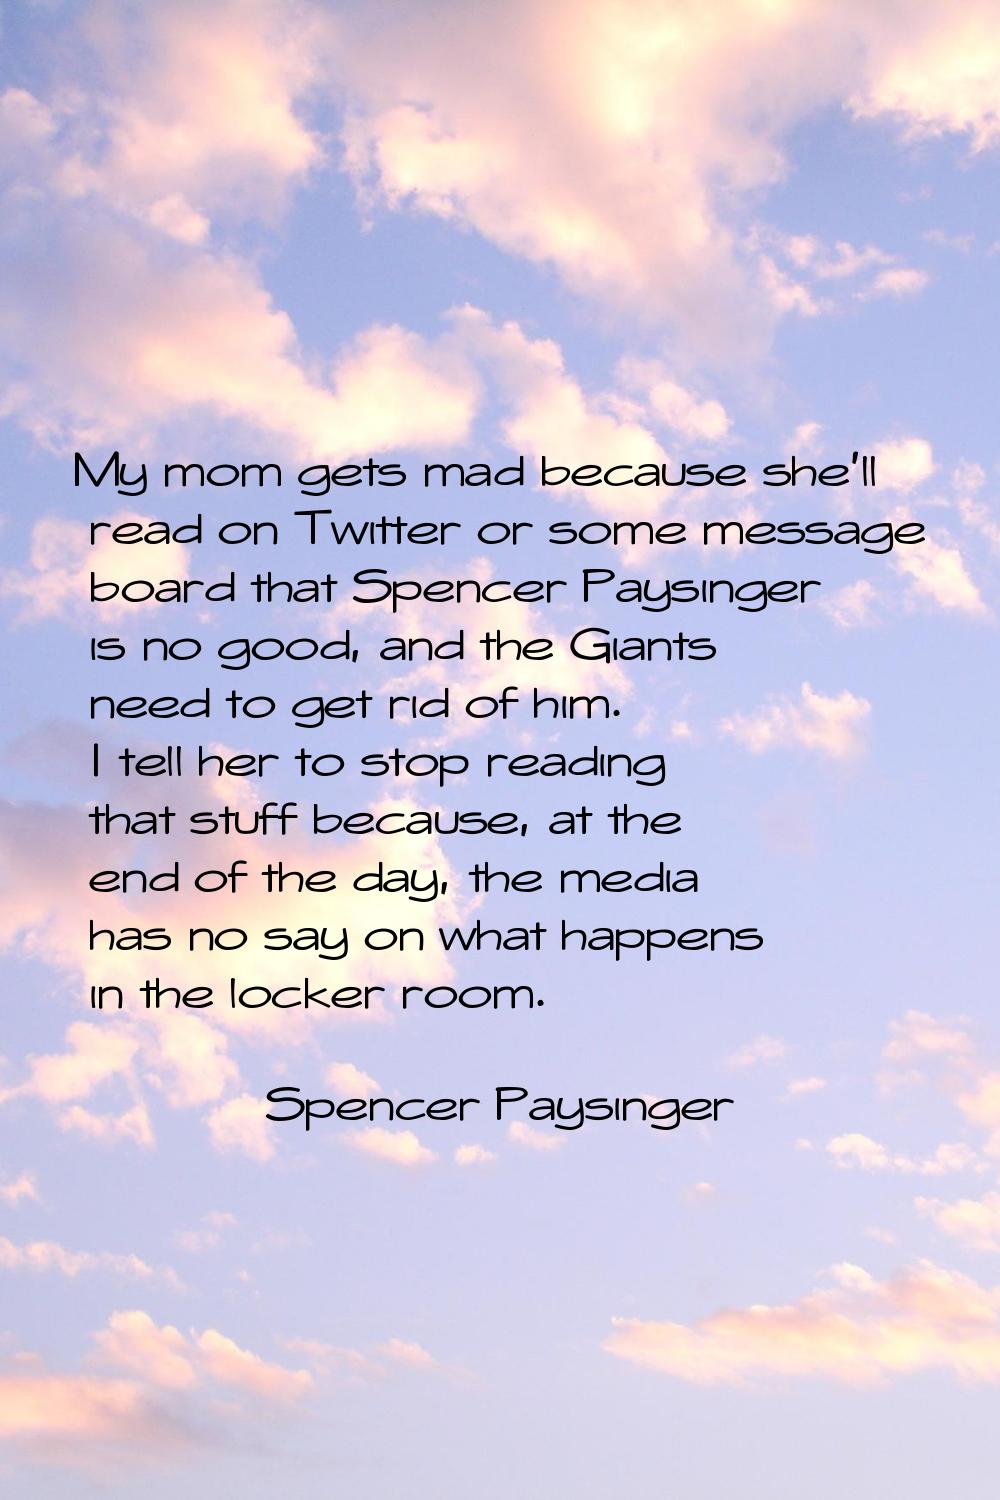 My mom gets mad because she'll read on Twitter or some message board that Spencer Paysinger is no g